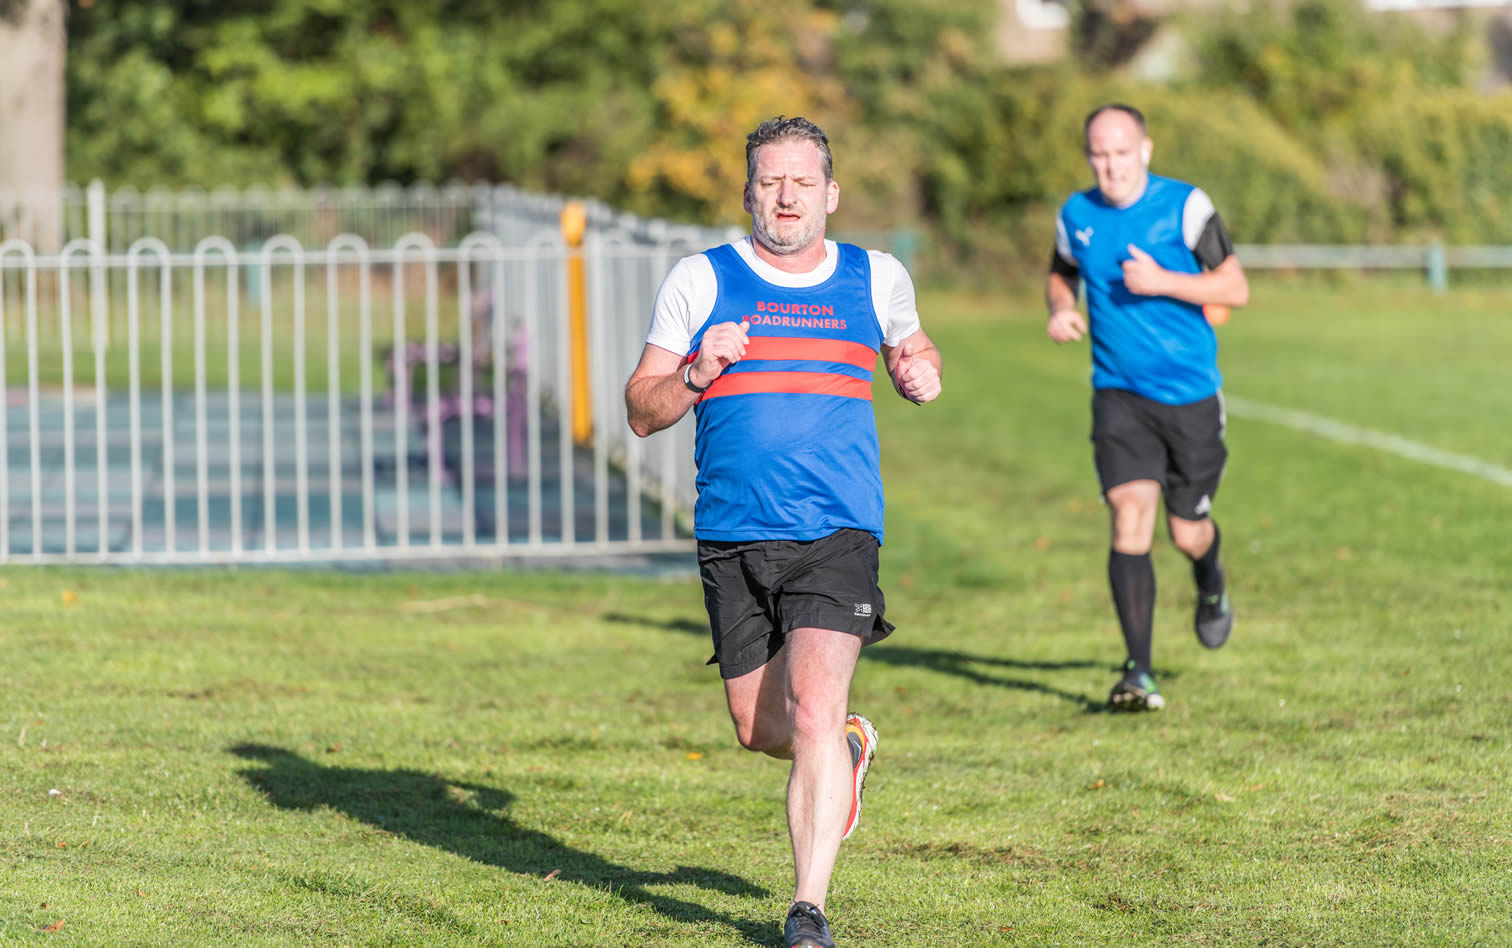 Bourton's Barry O'Leary finishing at King George V Playing Field parkrun, Cheltenham - 8-10-2022